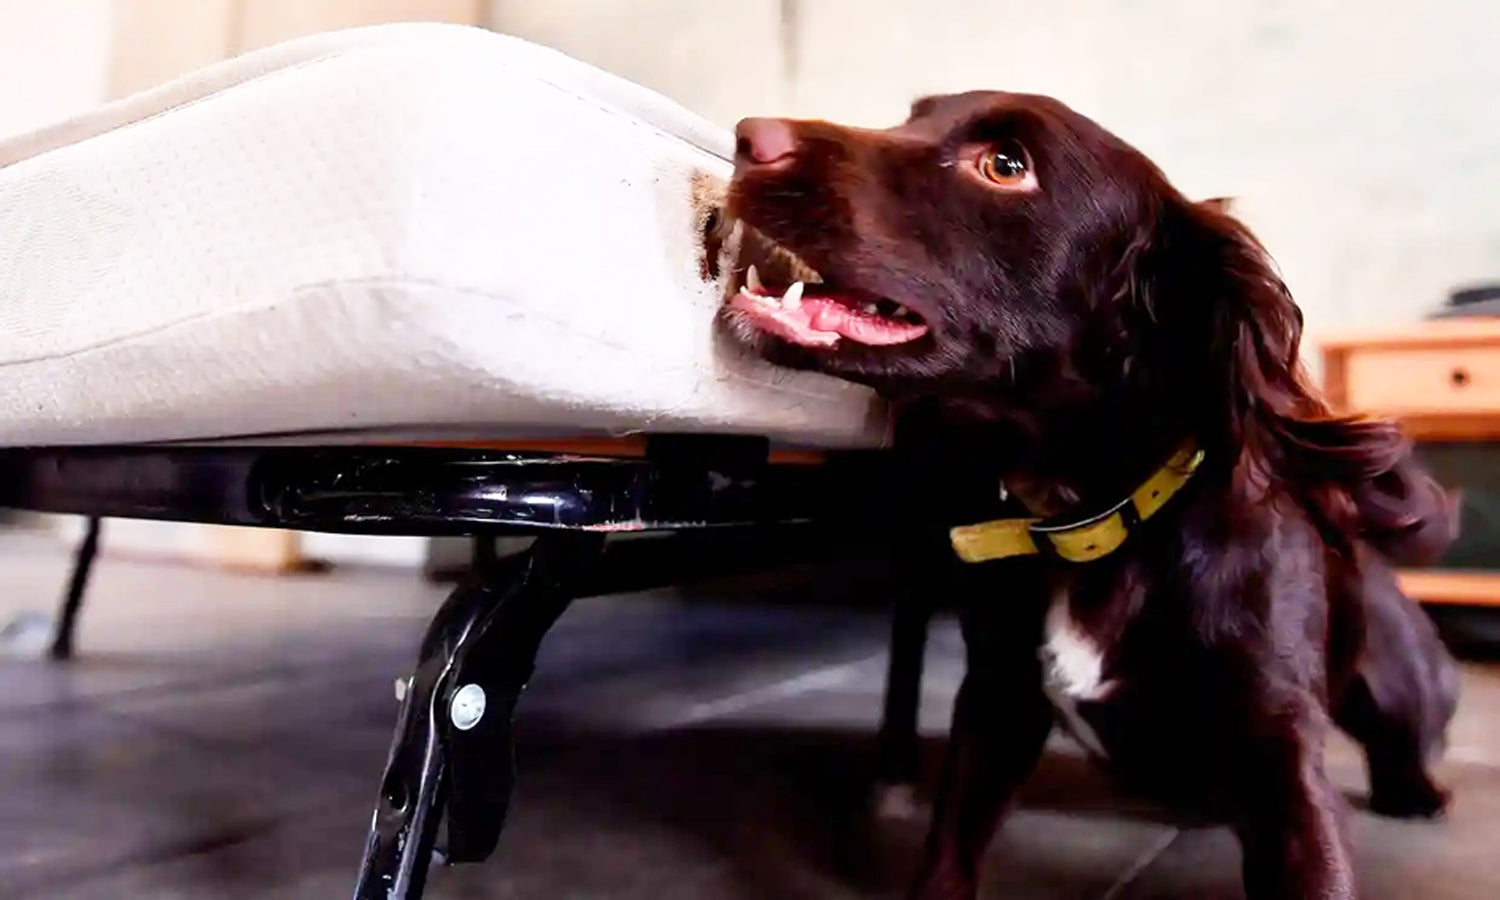 Sniffer dogs deployed to seek out bedbugs in UK hotels and homes